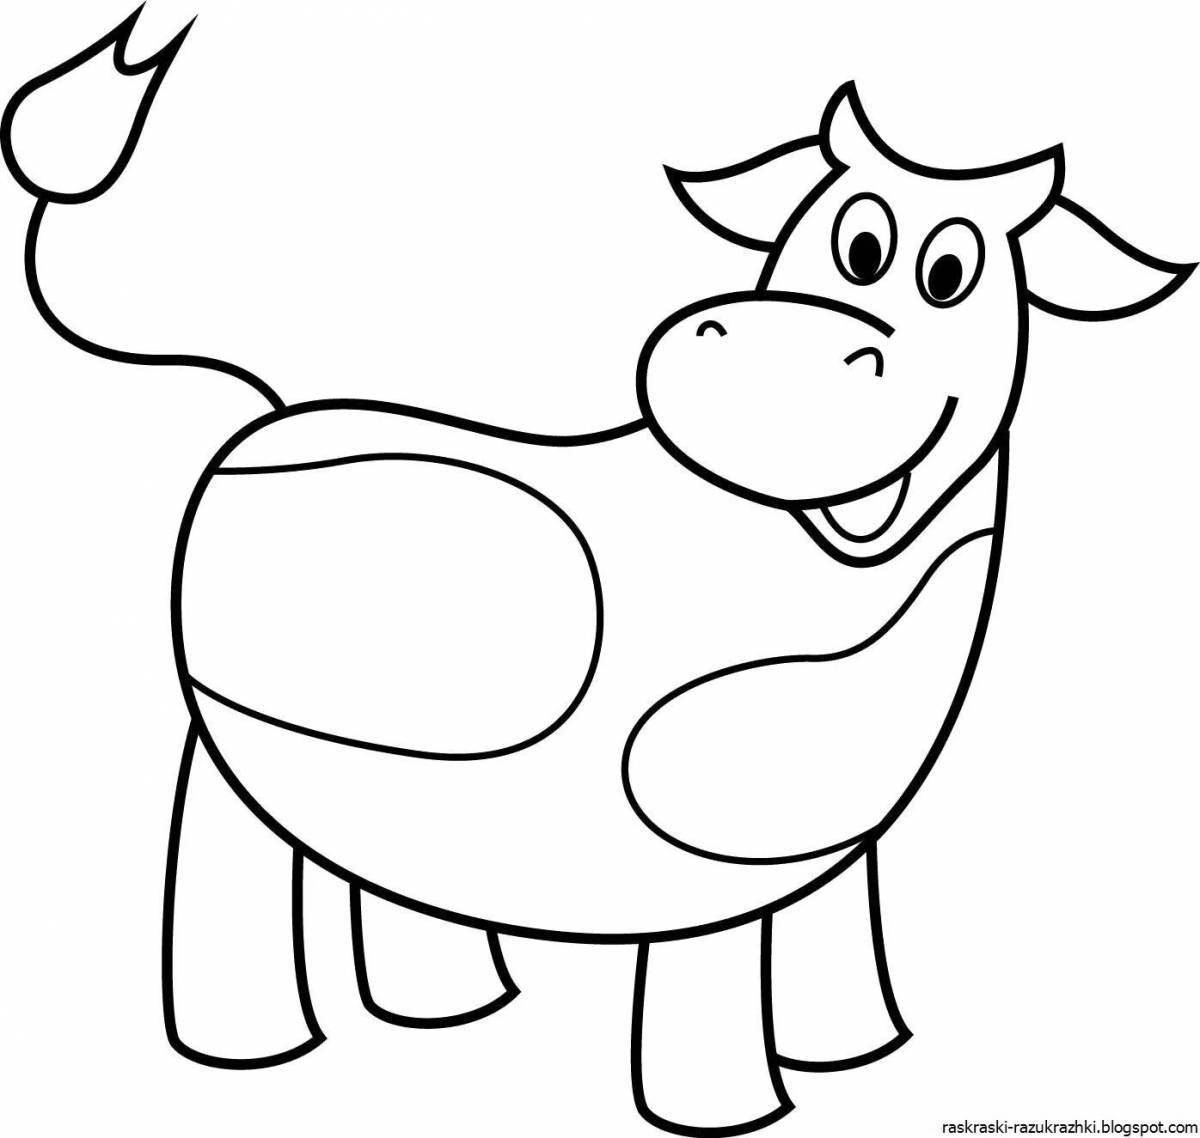 Live coloring cow for kids 2 3 years old